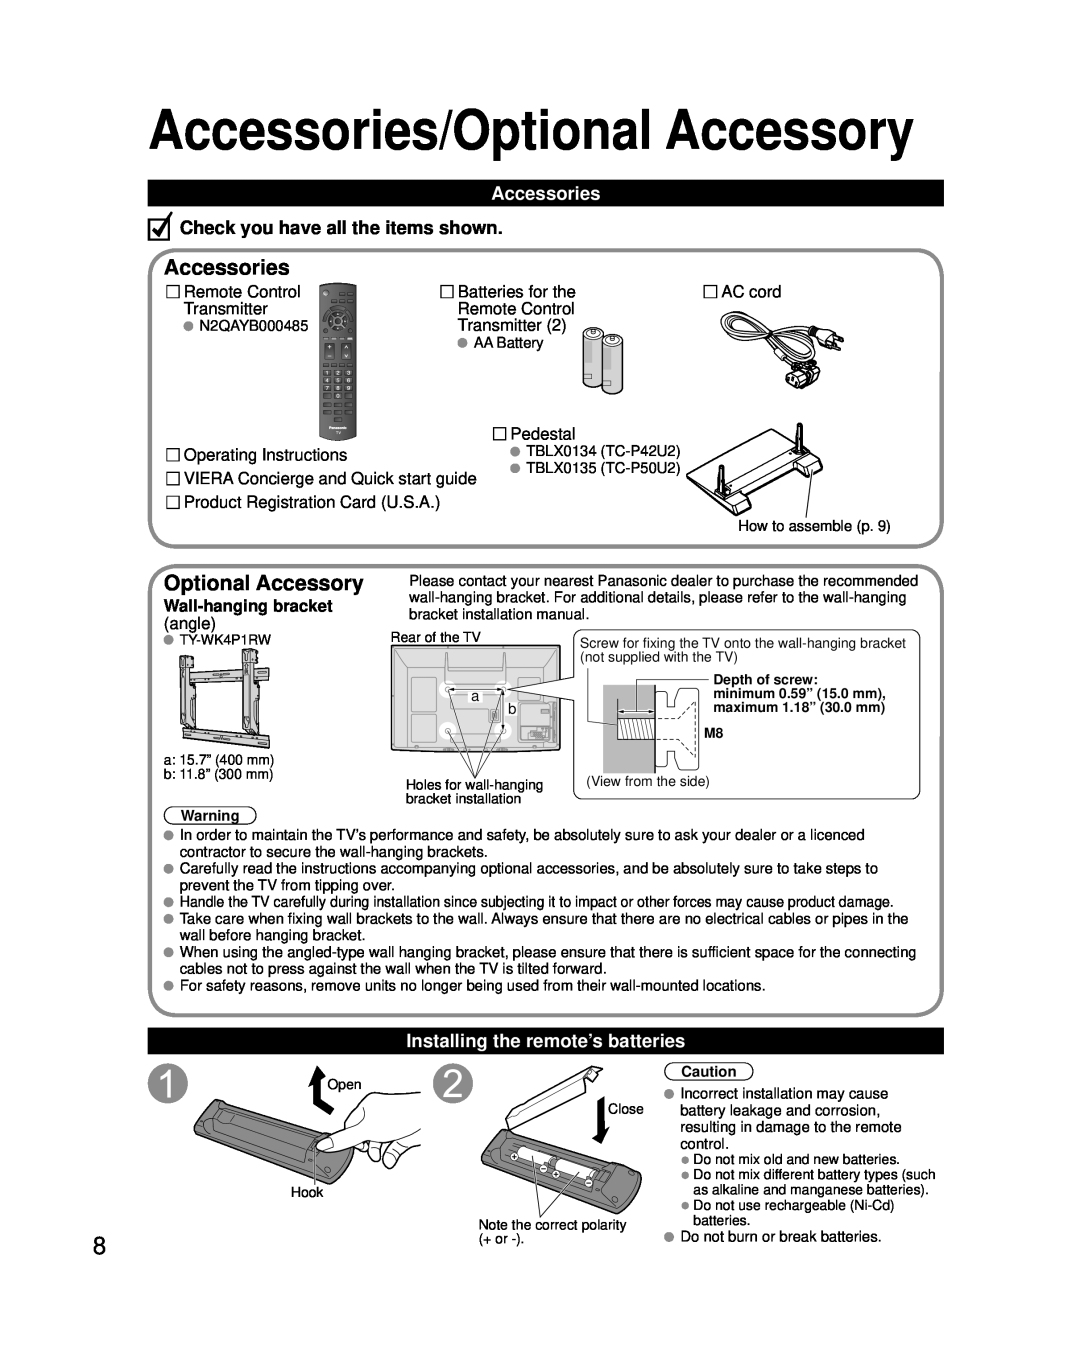 Panasonic TC-P42U2 Accessories/Optional Accessory, Check you have all the items shown, Installing the remote’s batteries 